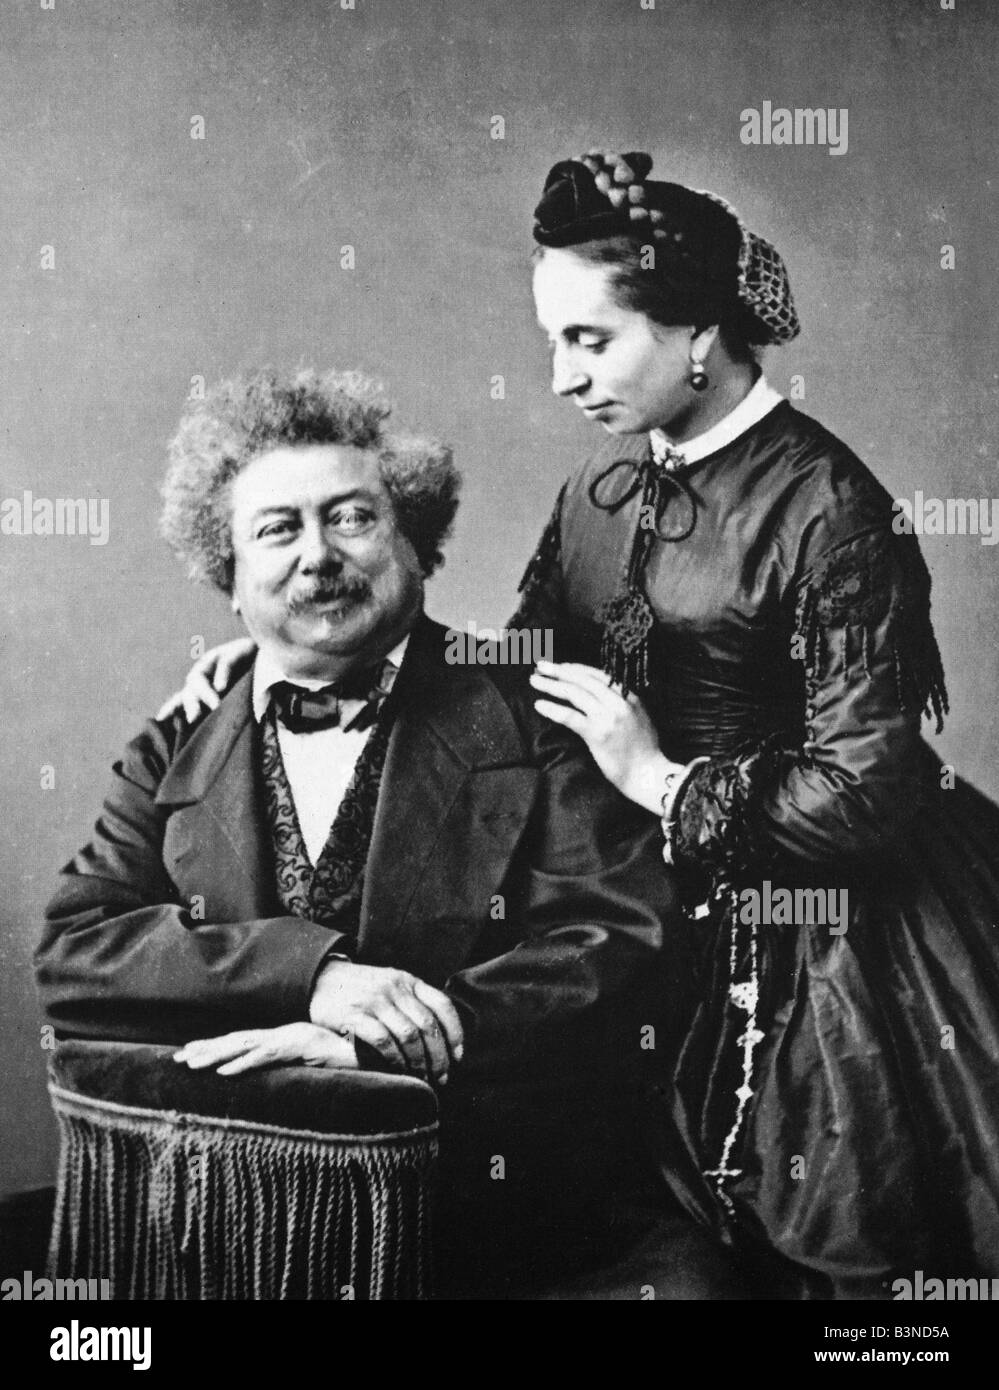 ALEXANDRE DUMAS French writer 1802 to 1870 with wife Marie about 1860. His most famous novel is The Three Musketeers (1844) Stock Photo